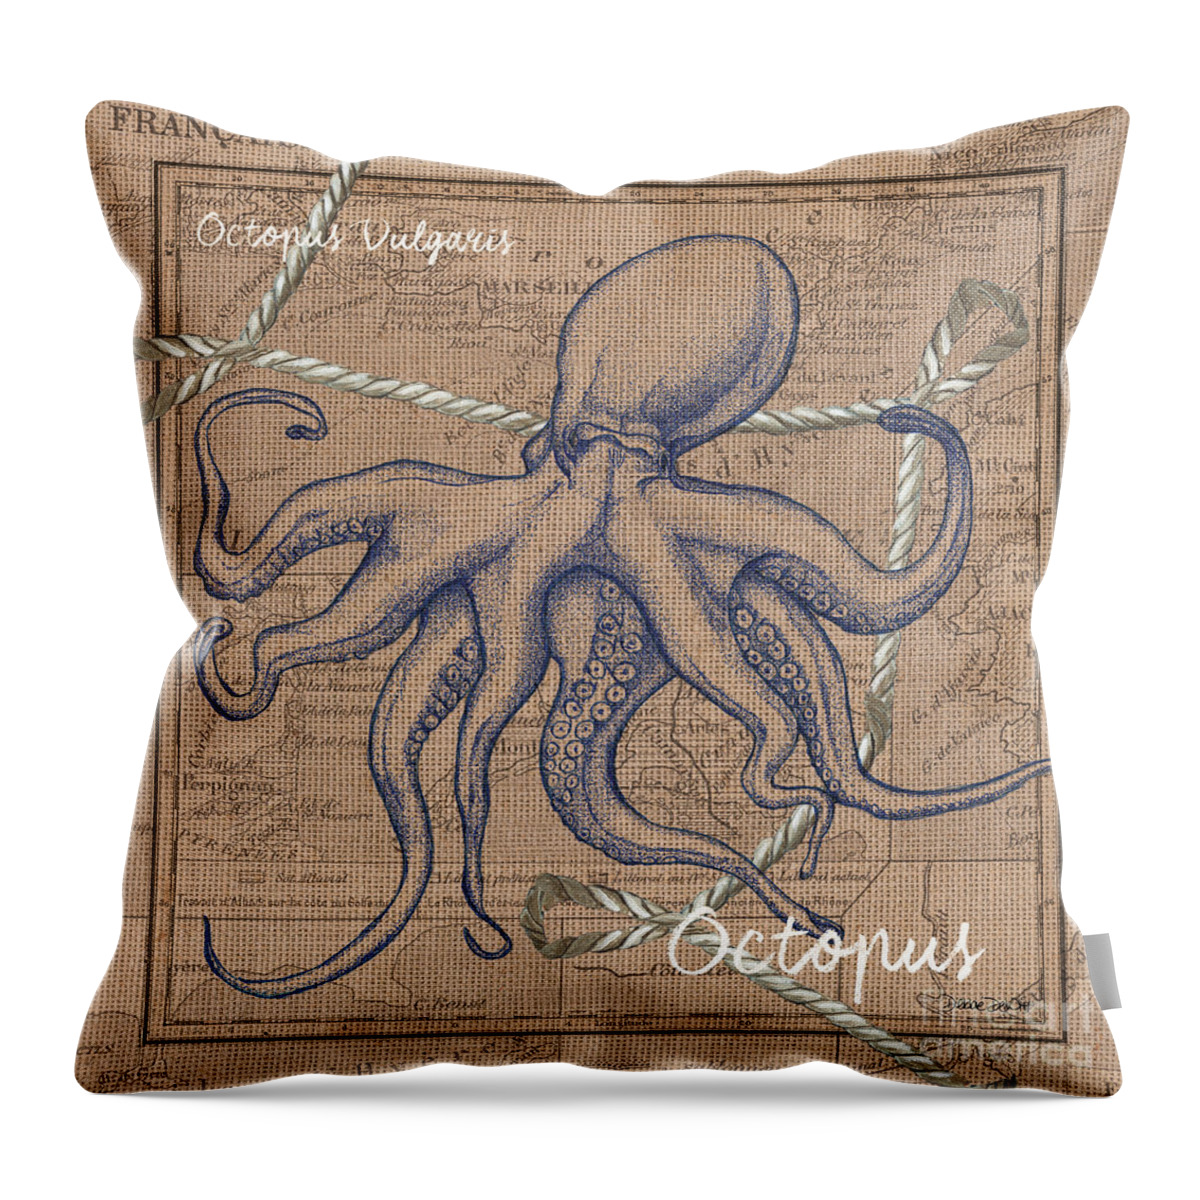 Octopus Throw Pillow featuring the painting Burlap Octopus by Debbie DeWitt